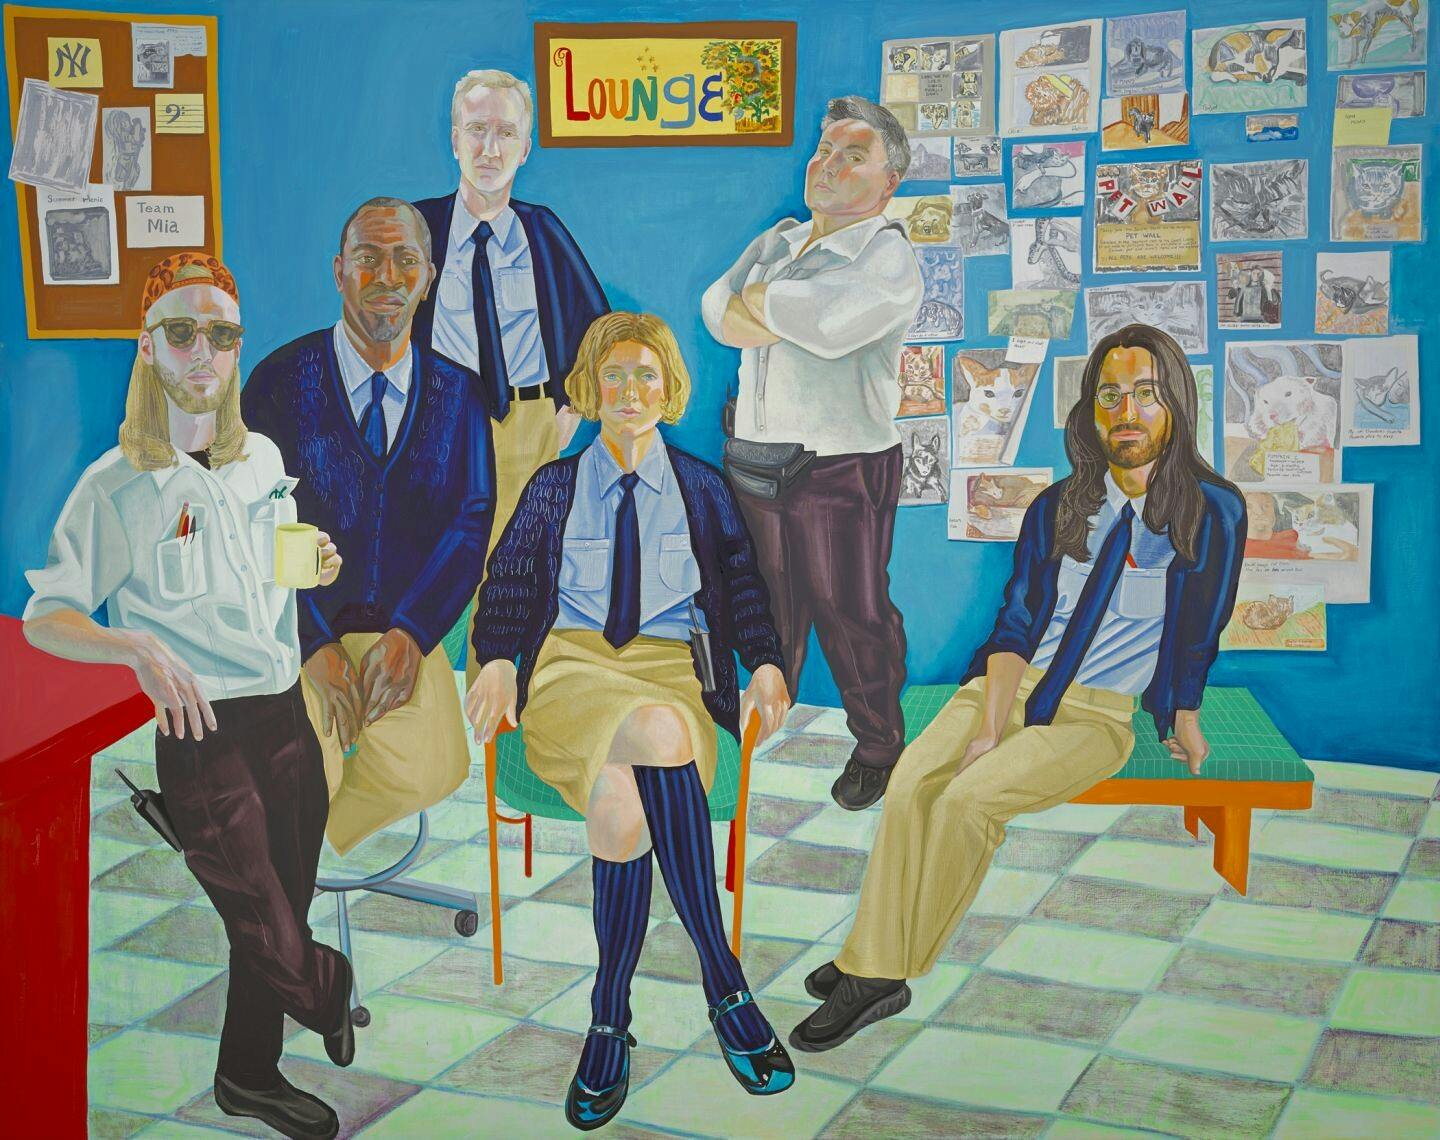 Aliza Nisenbaum, Morning Security Briefing at the Minneapolis Institute of Art, basement door open onto the Guard Lounge Pet Wall, 2017. Oil on linen, 95 x 75 inches.